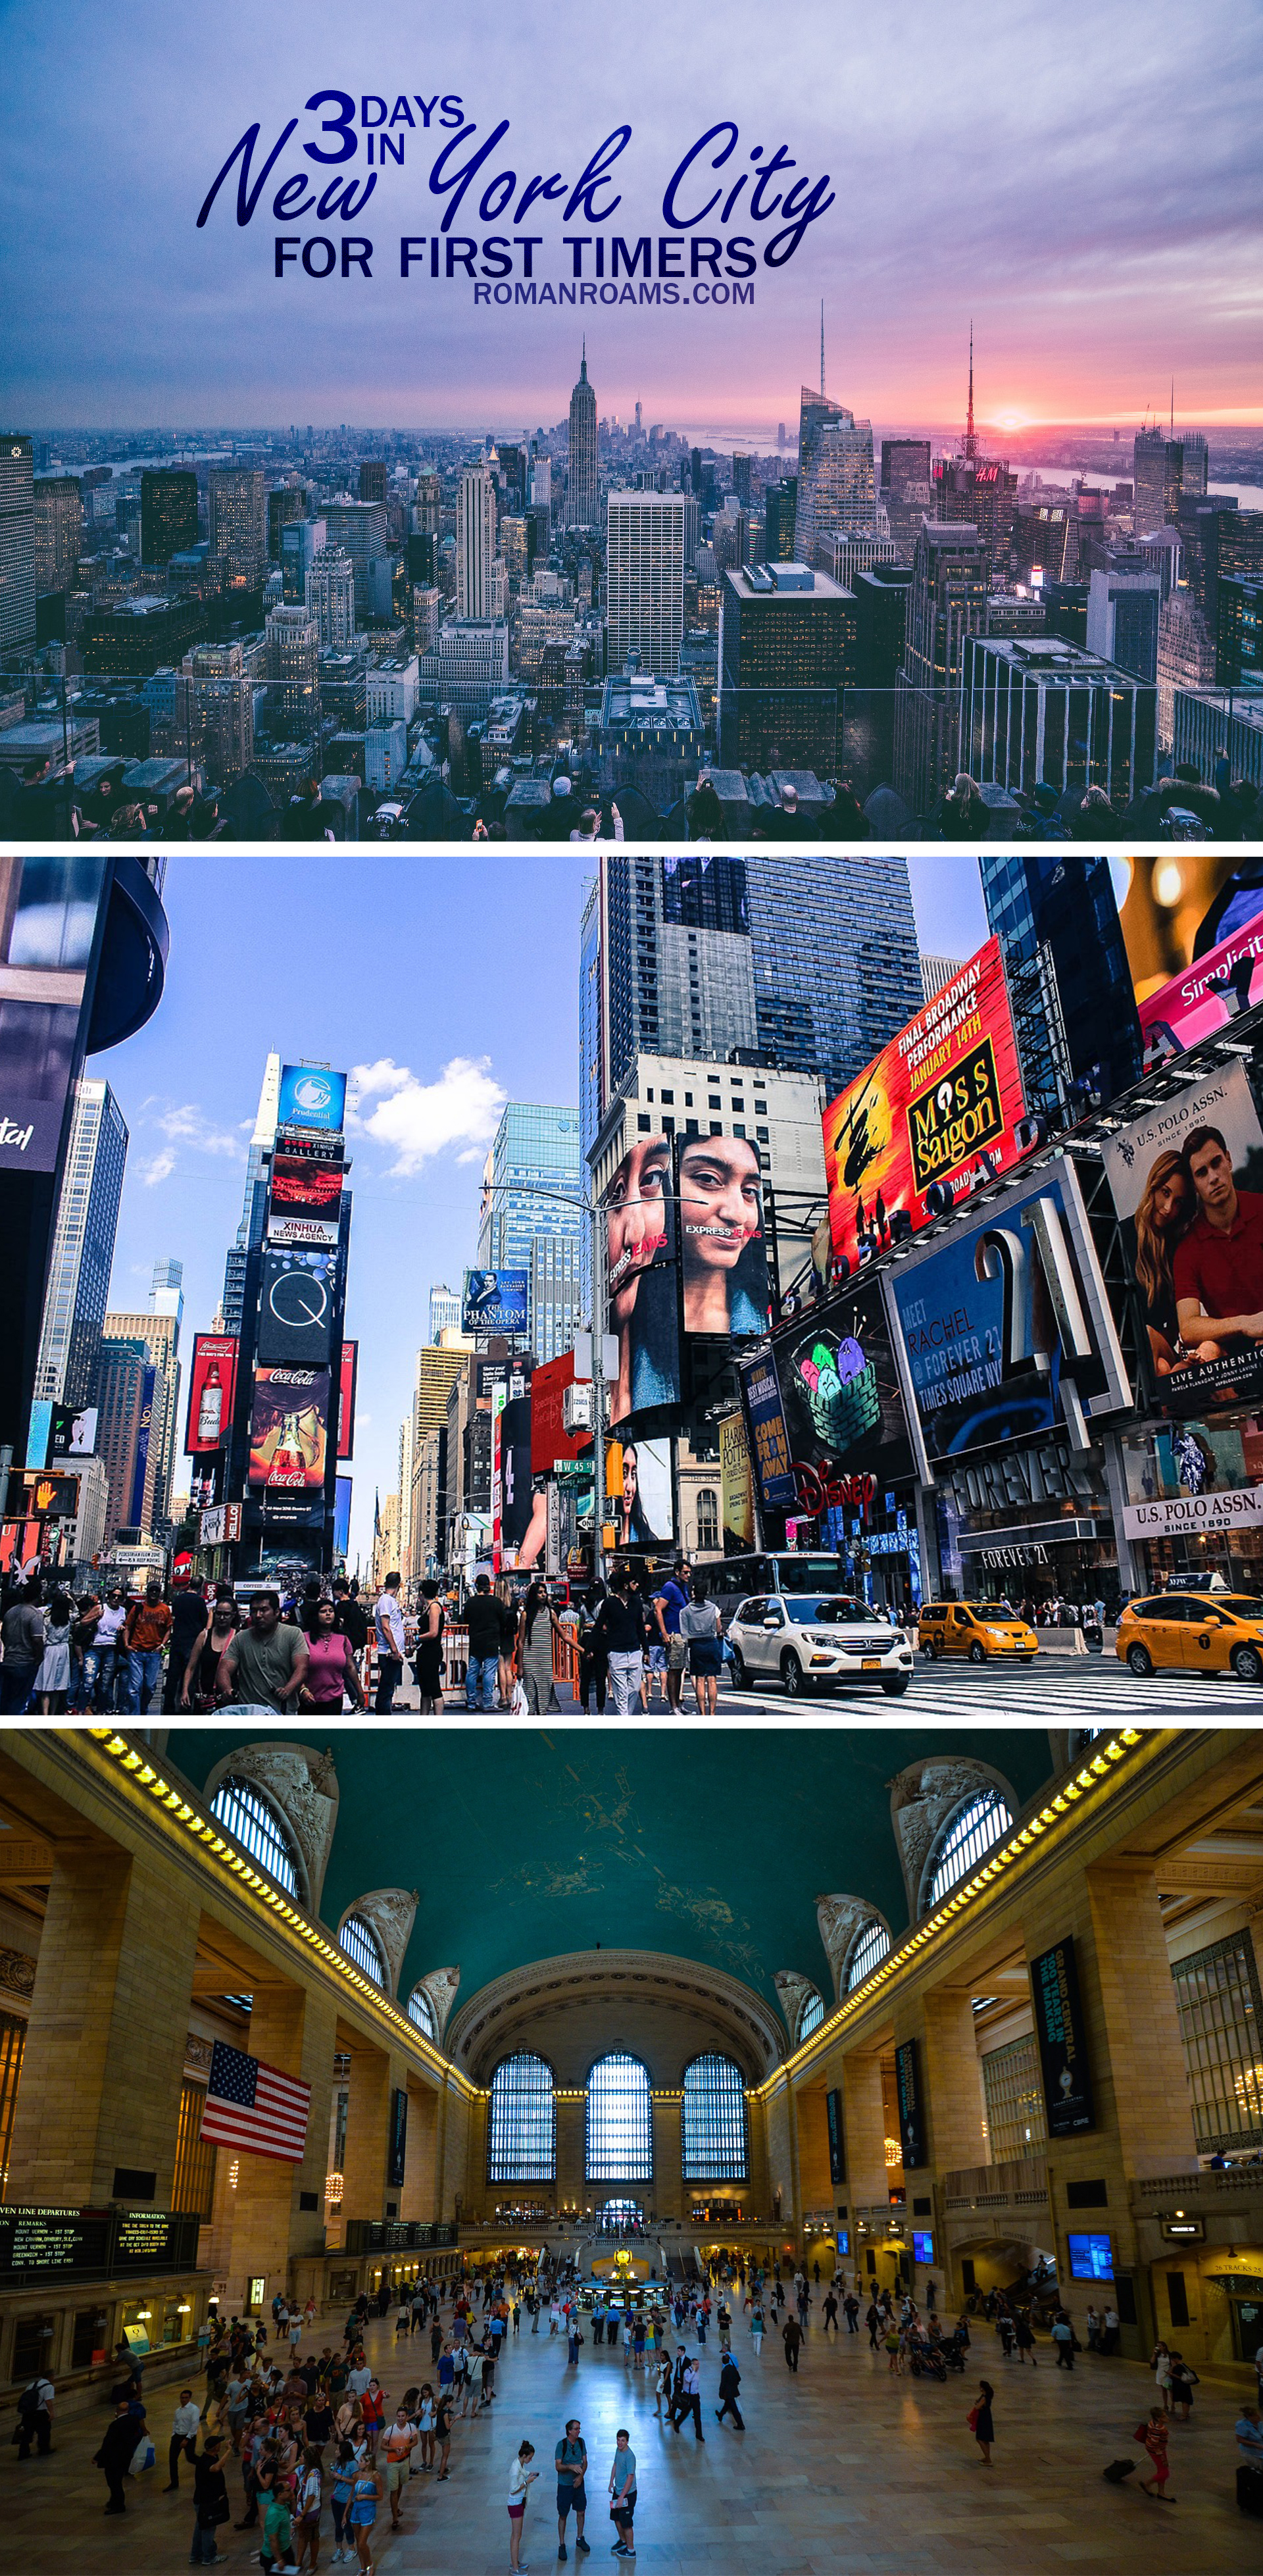 NYC attractions in 3 days